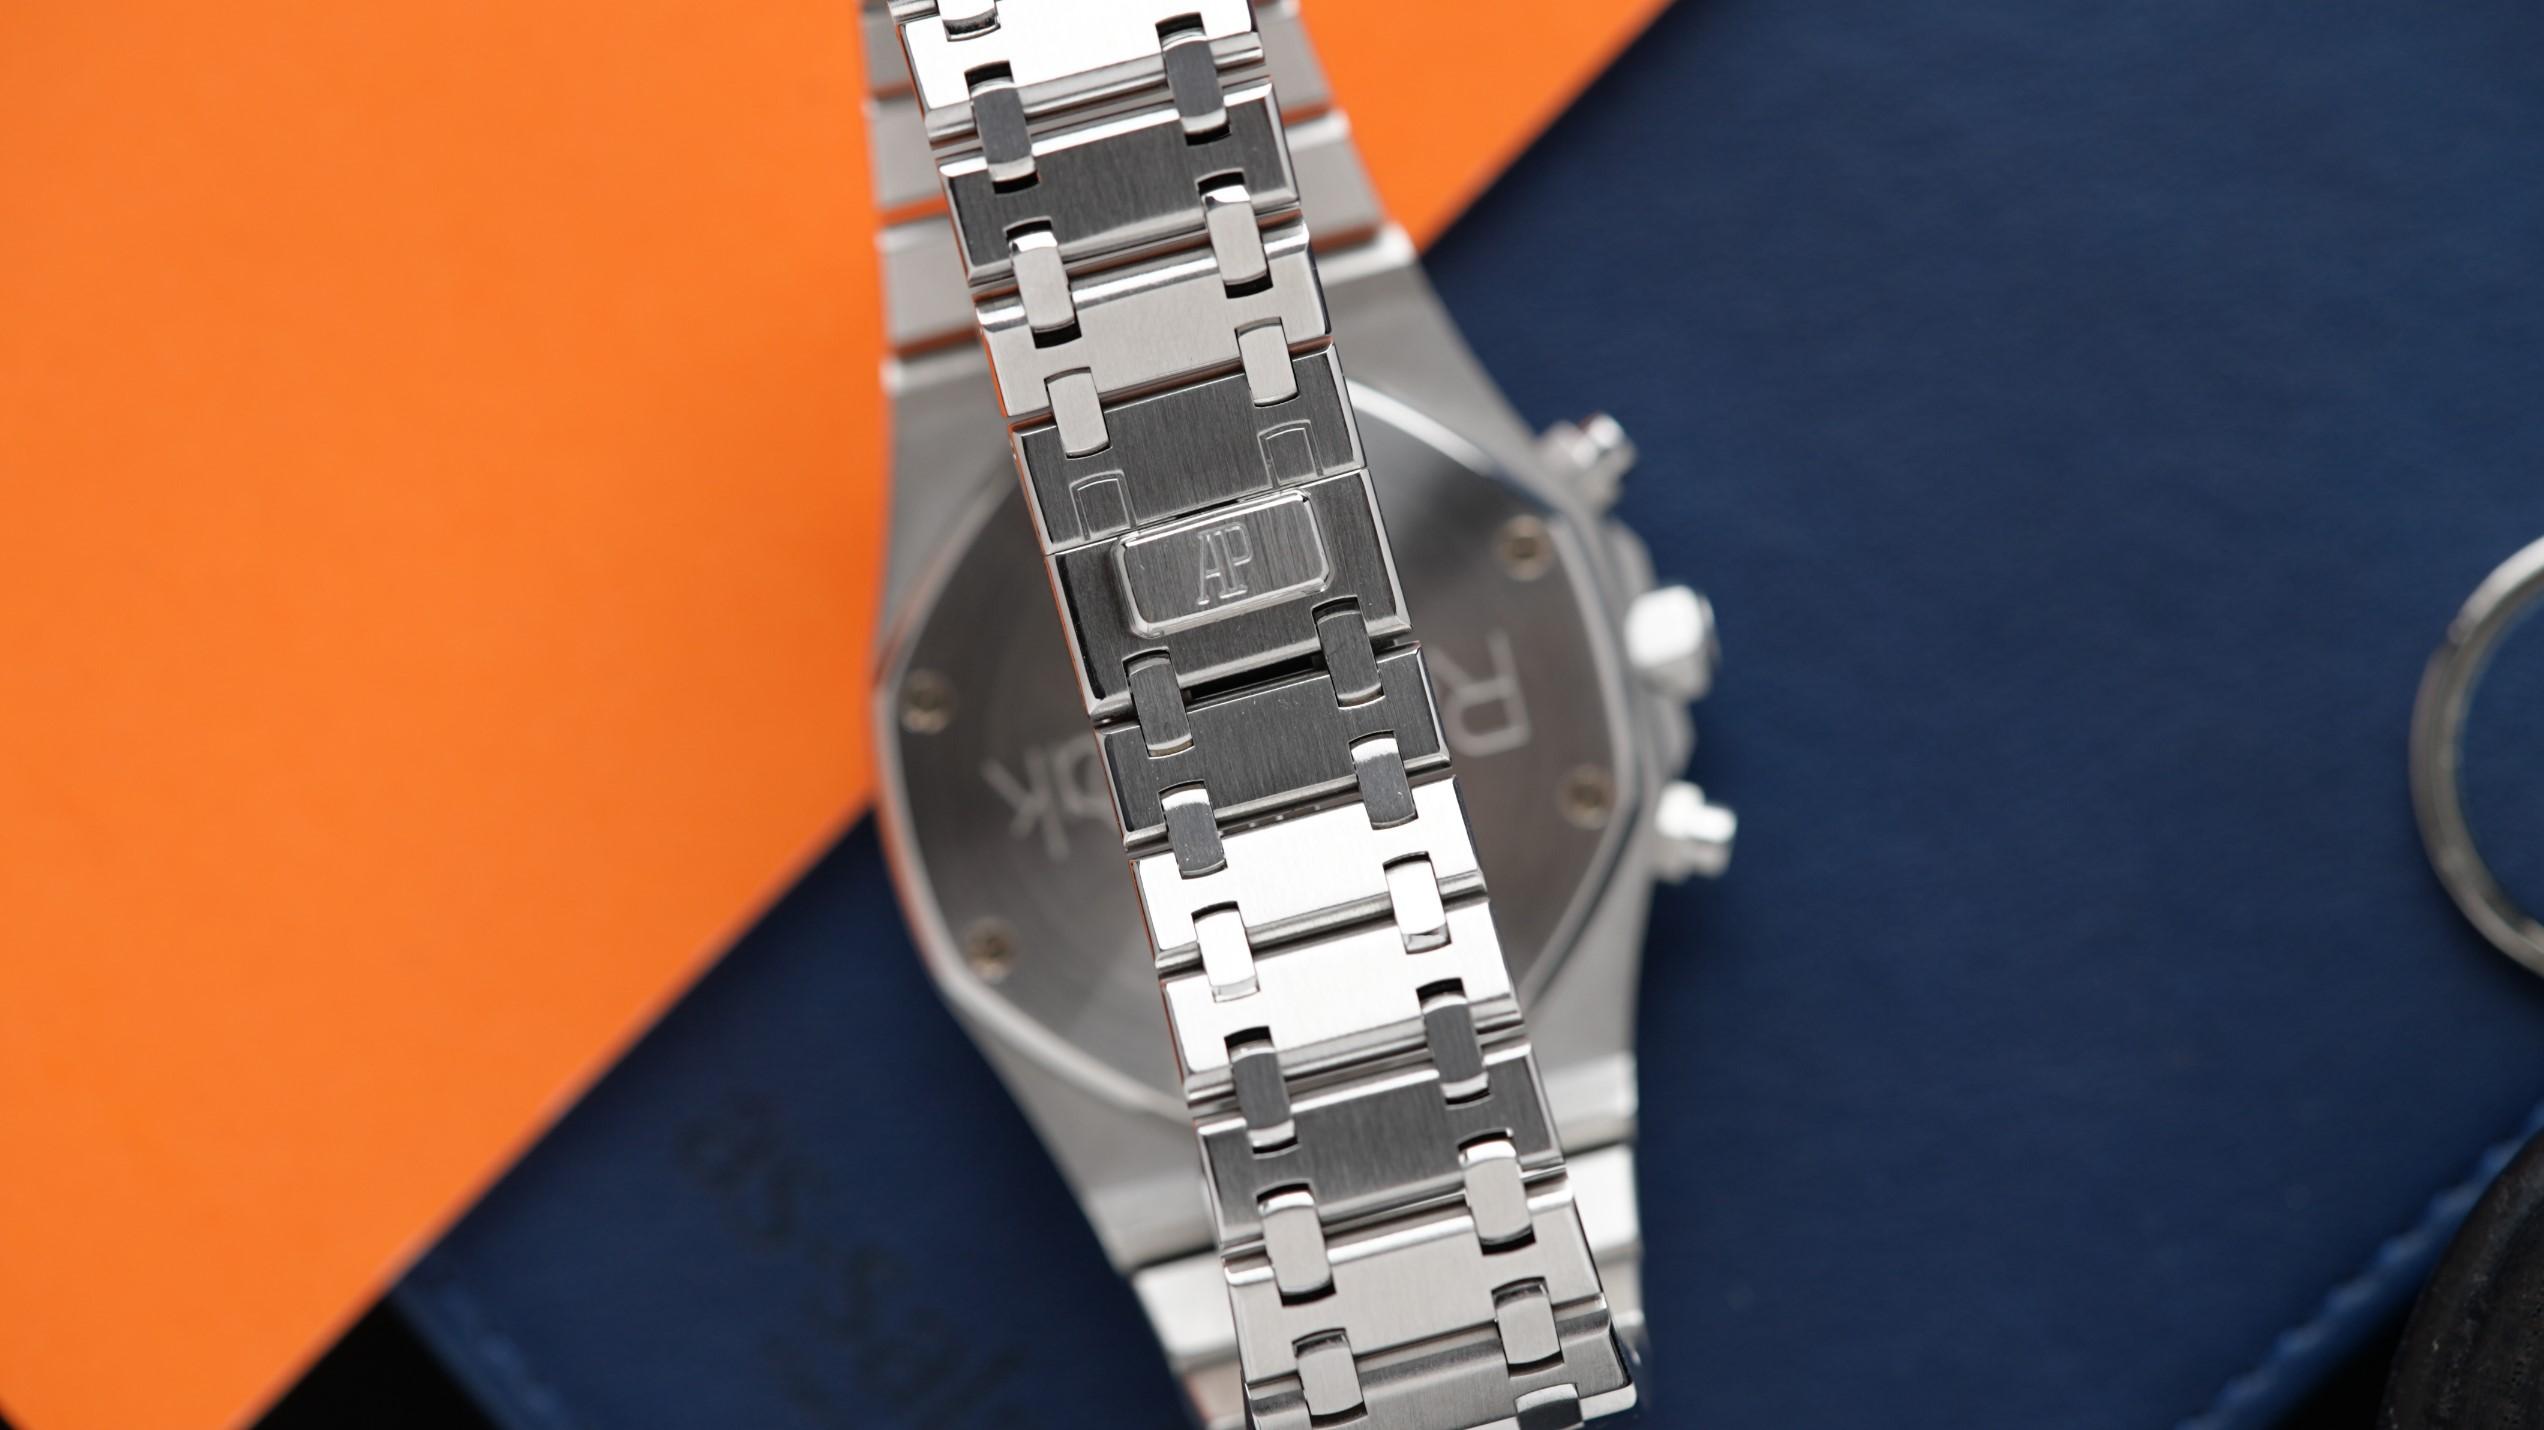 The back side, bracelet, and clasp of the Audemars Piguet Royal Oak Chronograph Jumbo 39MM shown under white light with orange and blue background props.